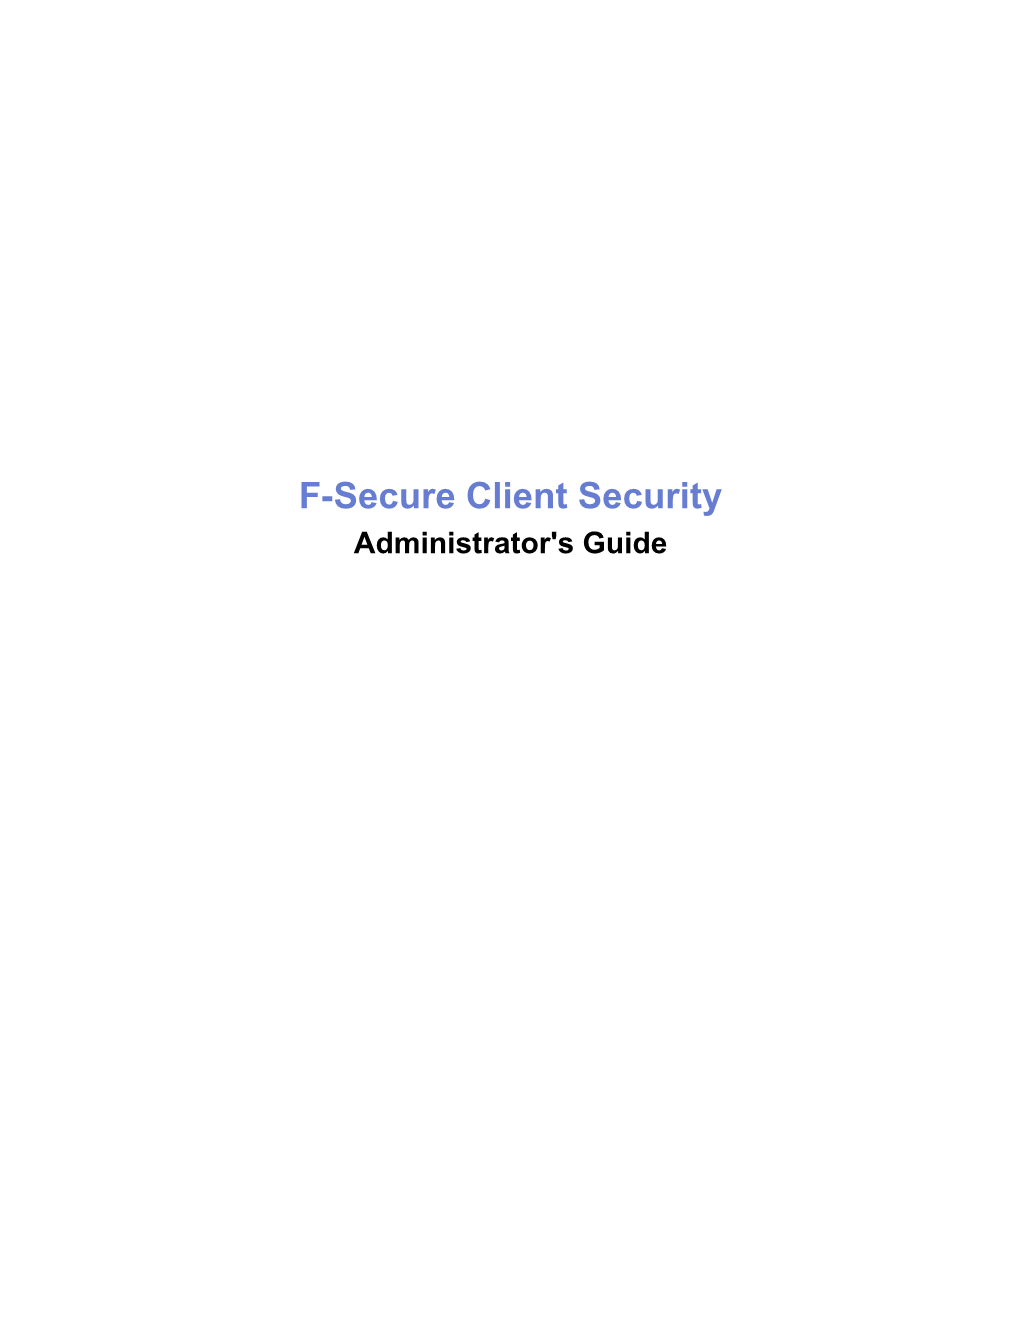 F-Secure Client Security Administrator's Guide